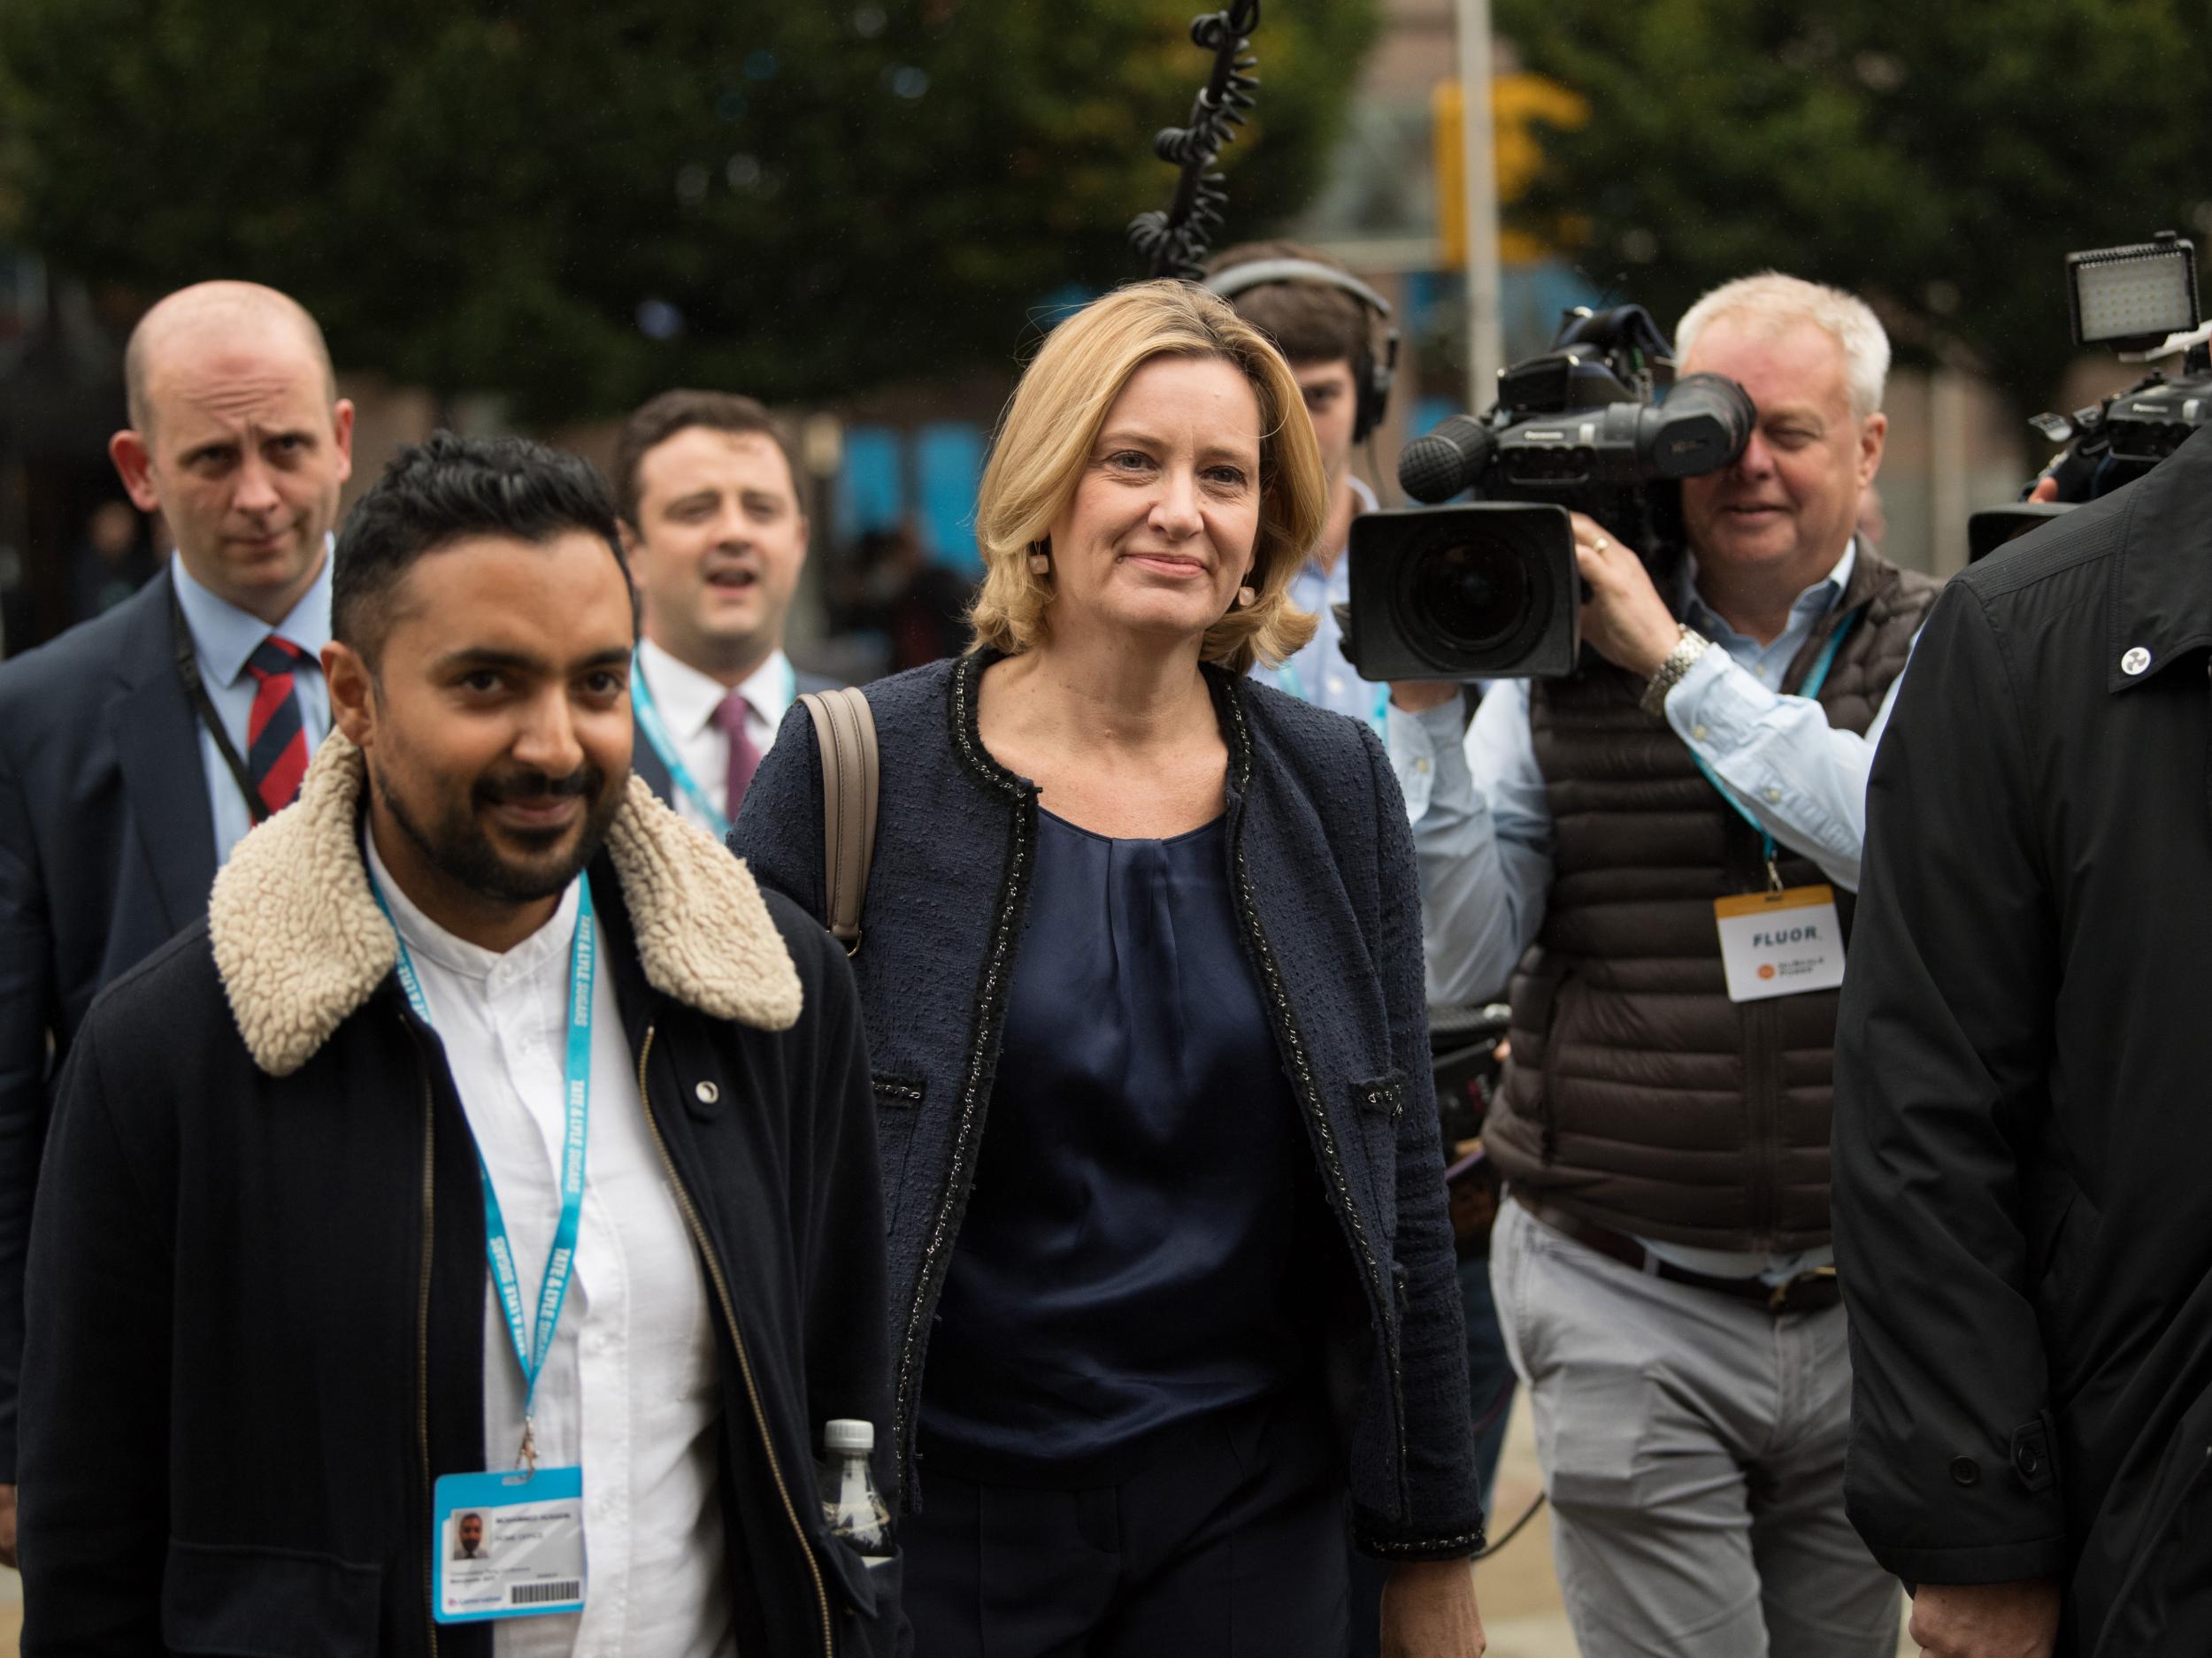 I urge Amber Rudd to work with, not against, tech experts